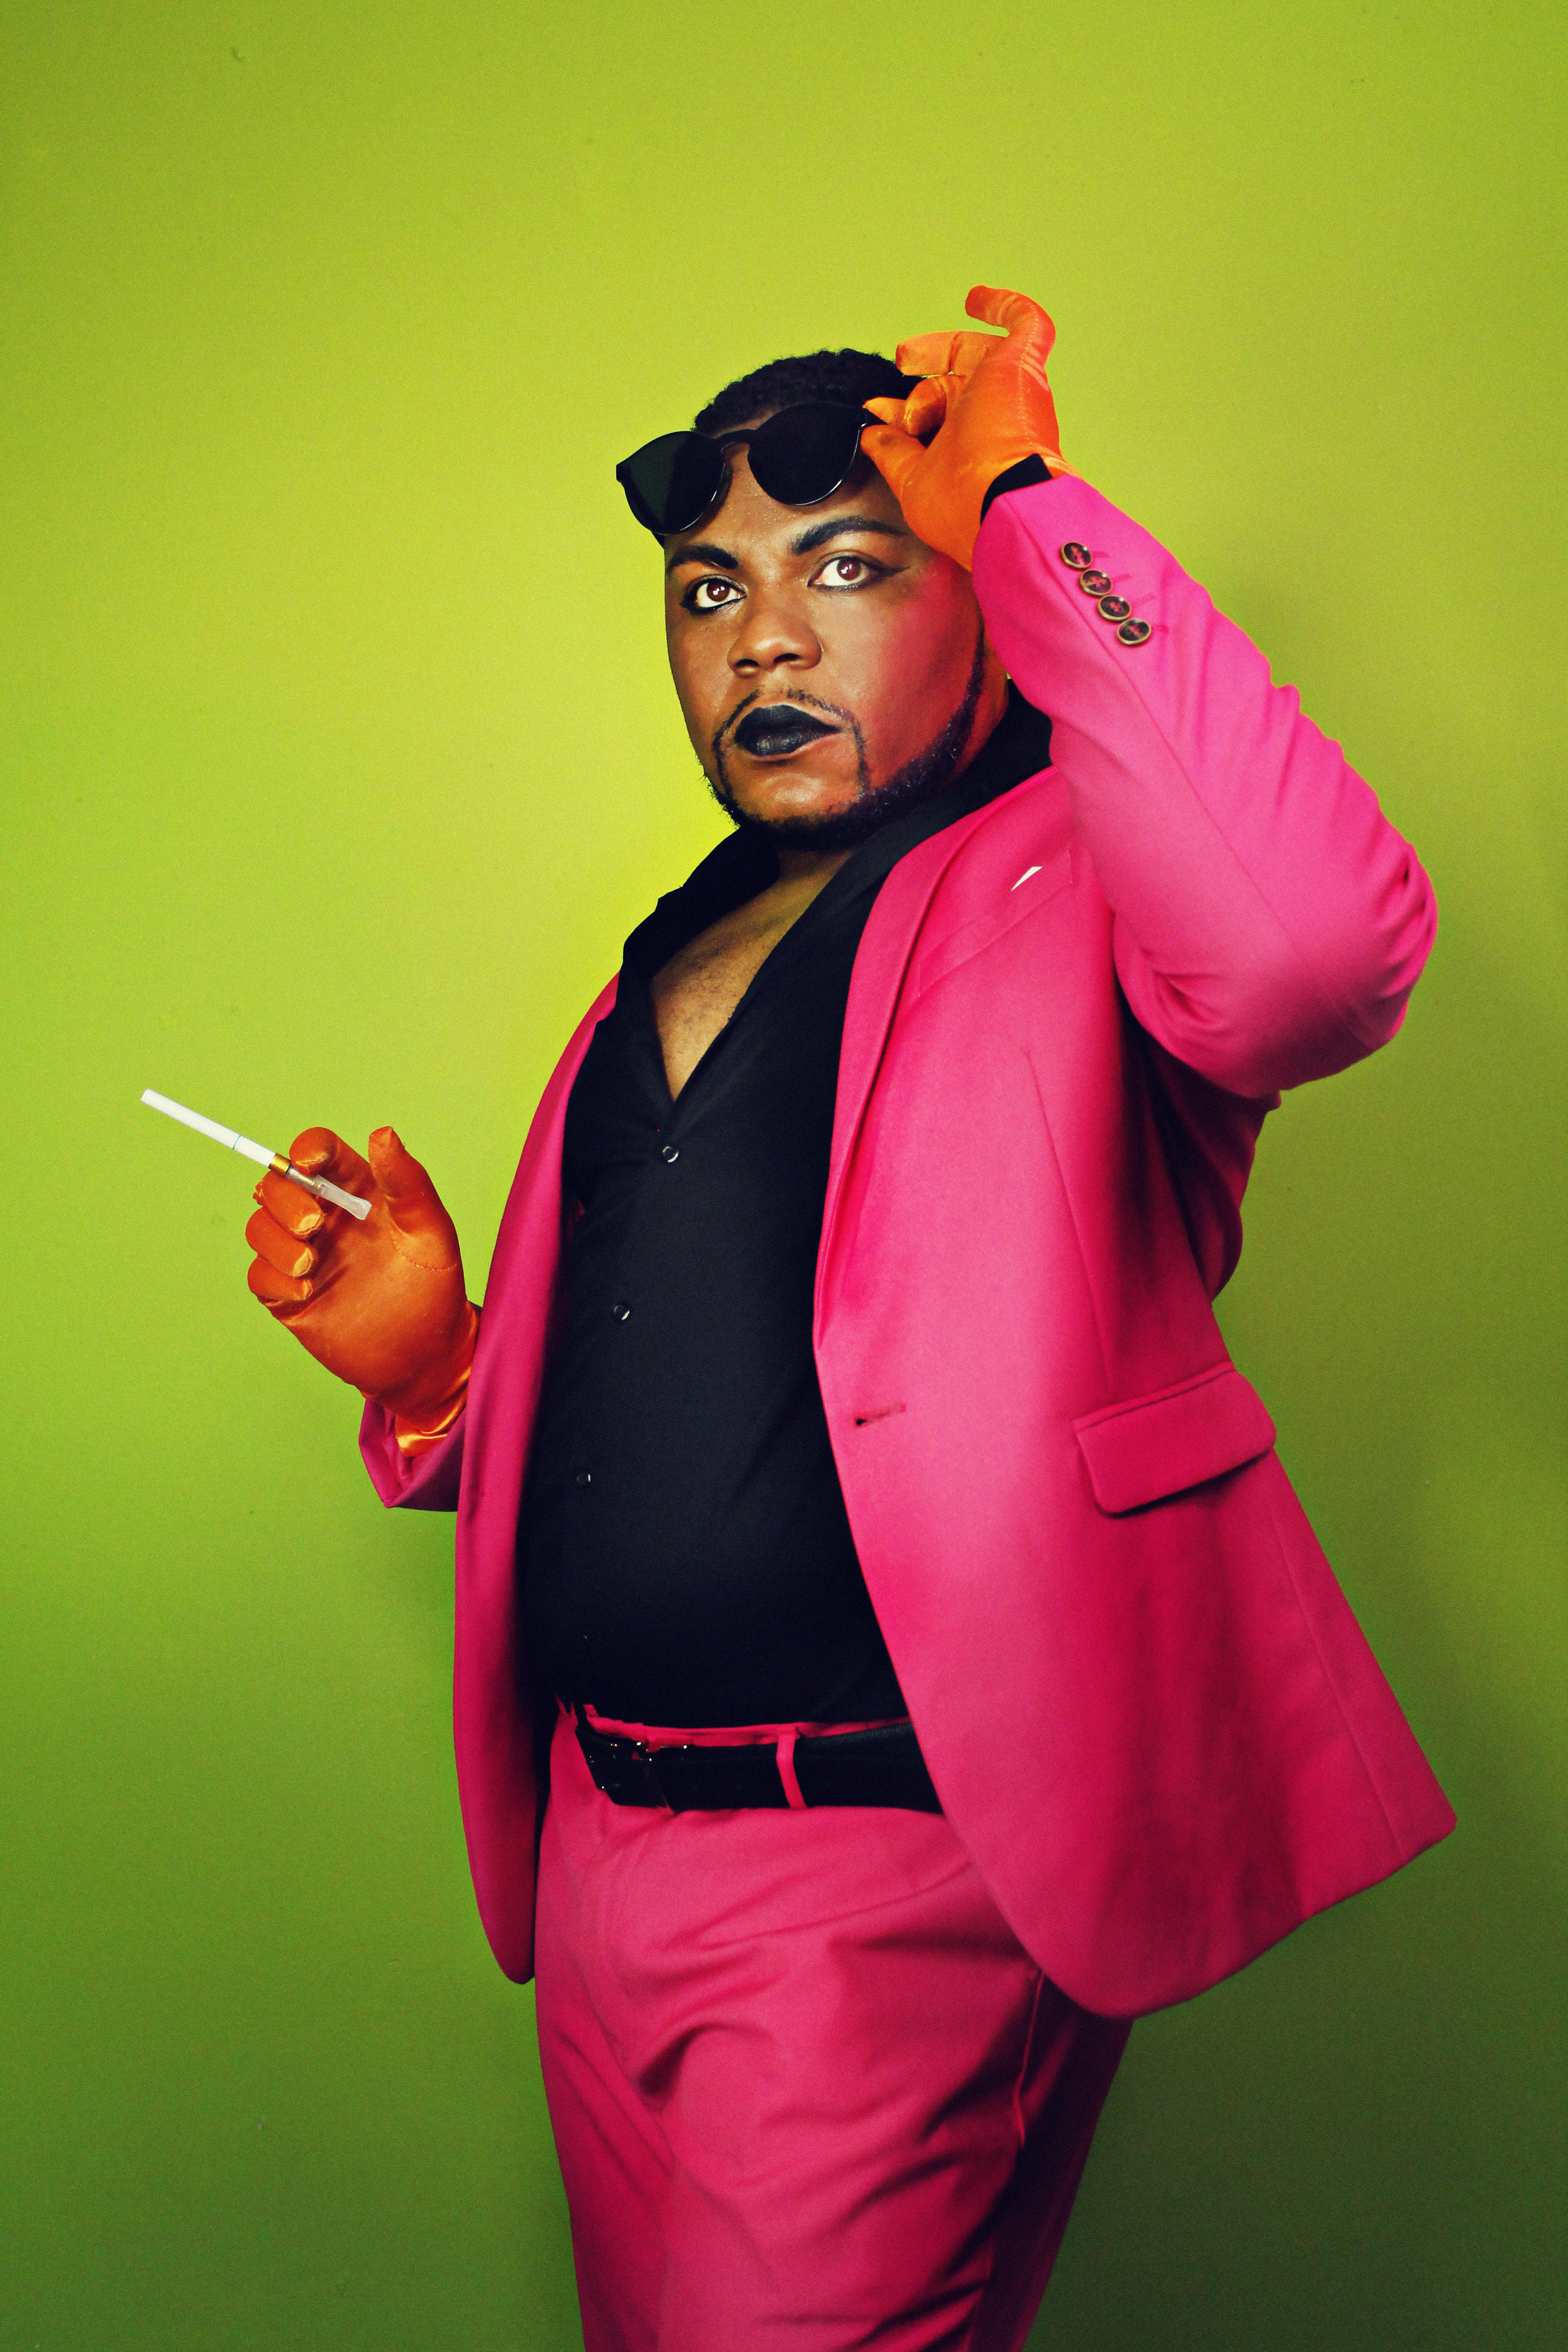 Dezi 5, against a neon green backdrop, is wearing a hot pink suit and black shirt, holding a cigarette and raising sunglasses off his eyes